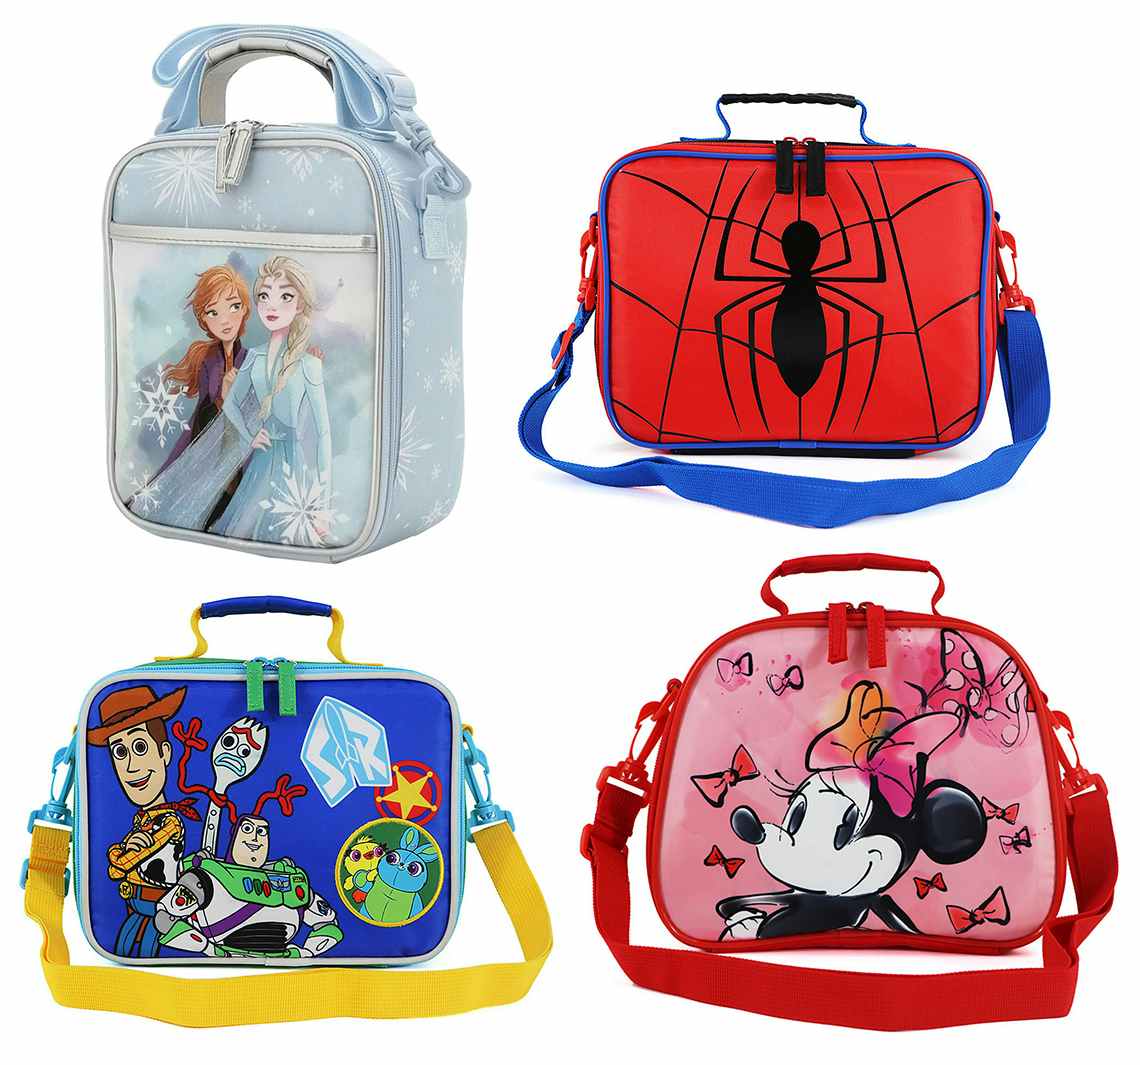 Four Disney lunch bags